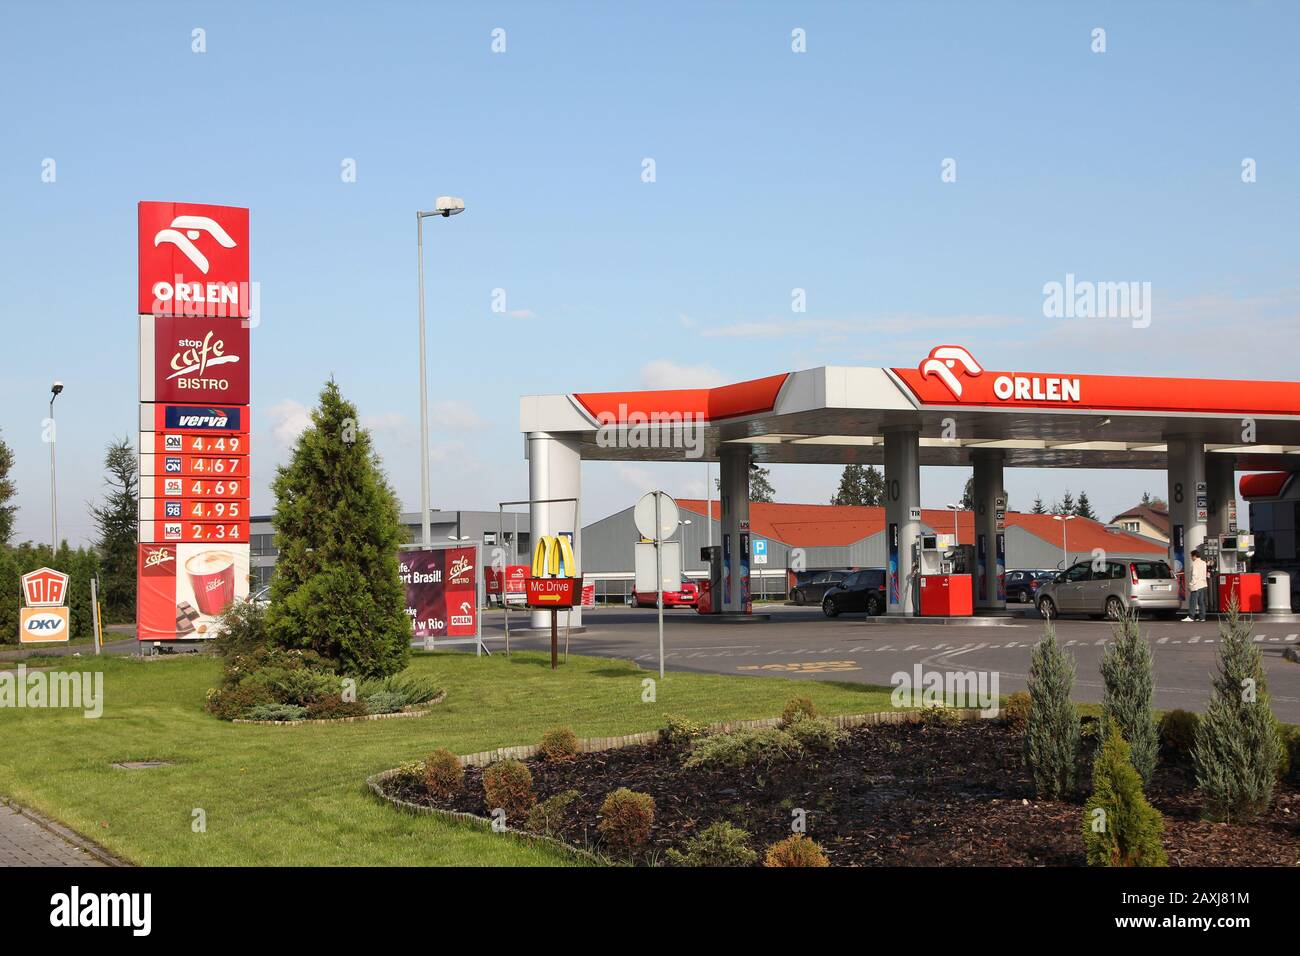 PLOCK - SEPTEMBER 7: Orlen gas station on September 7, 2010 in Plock, Poland. Orlen is the largest Polish company and one of 500 largest in the world. Stock Photo